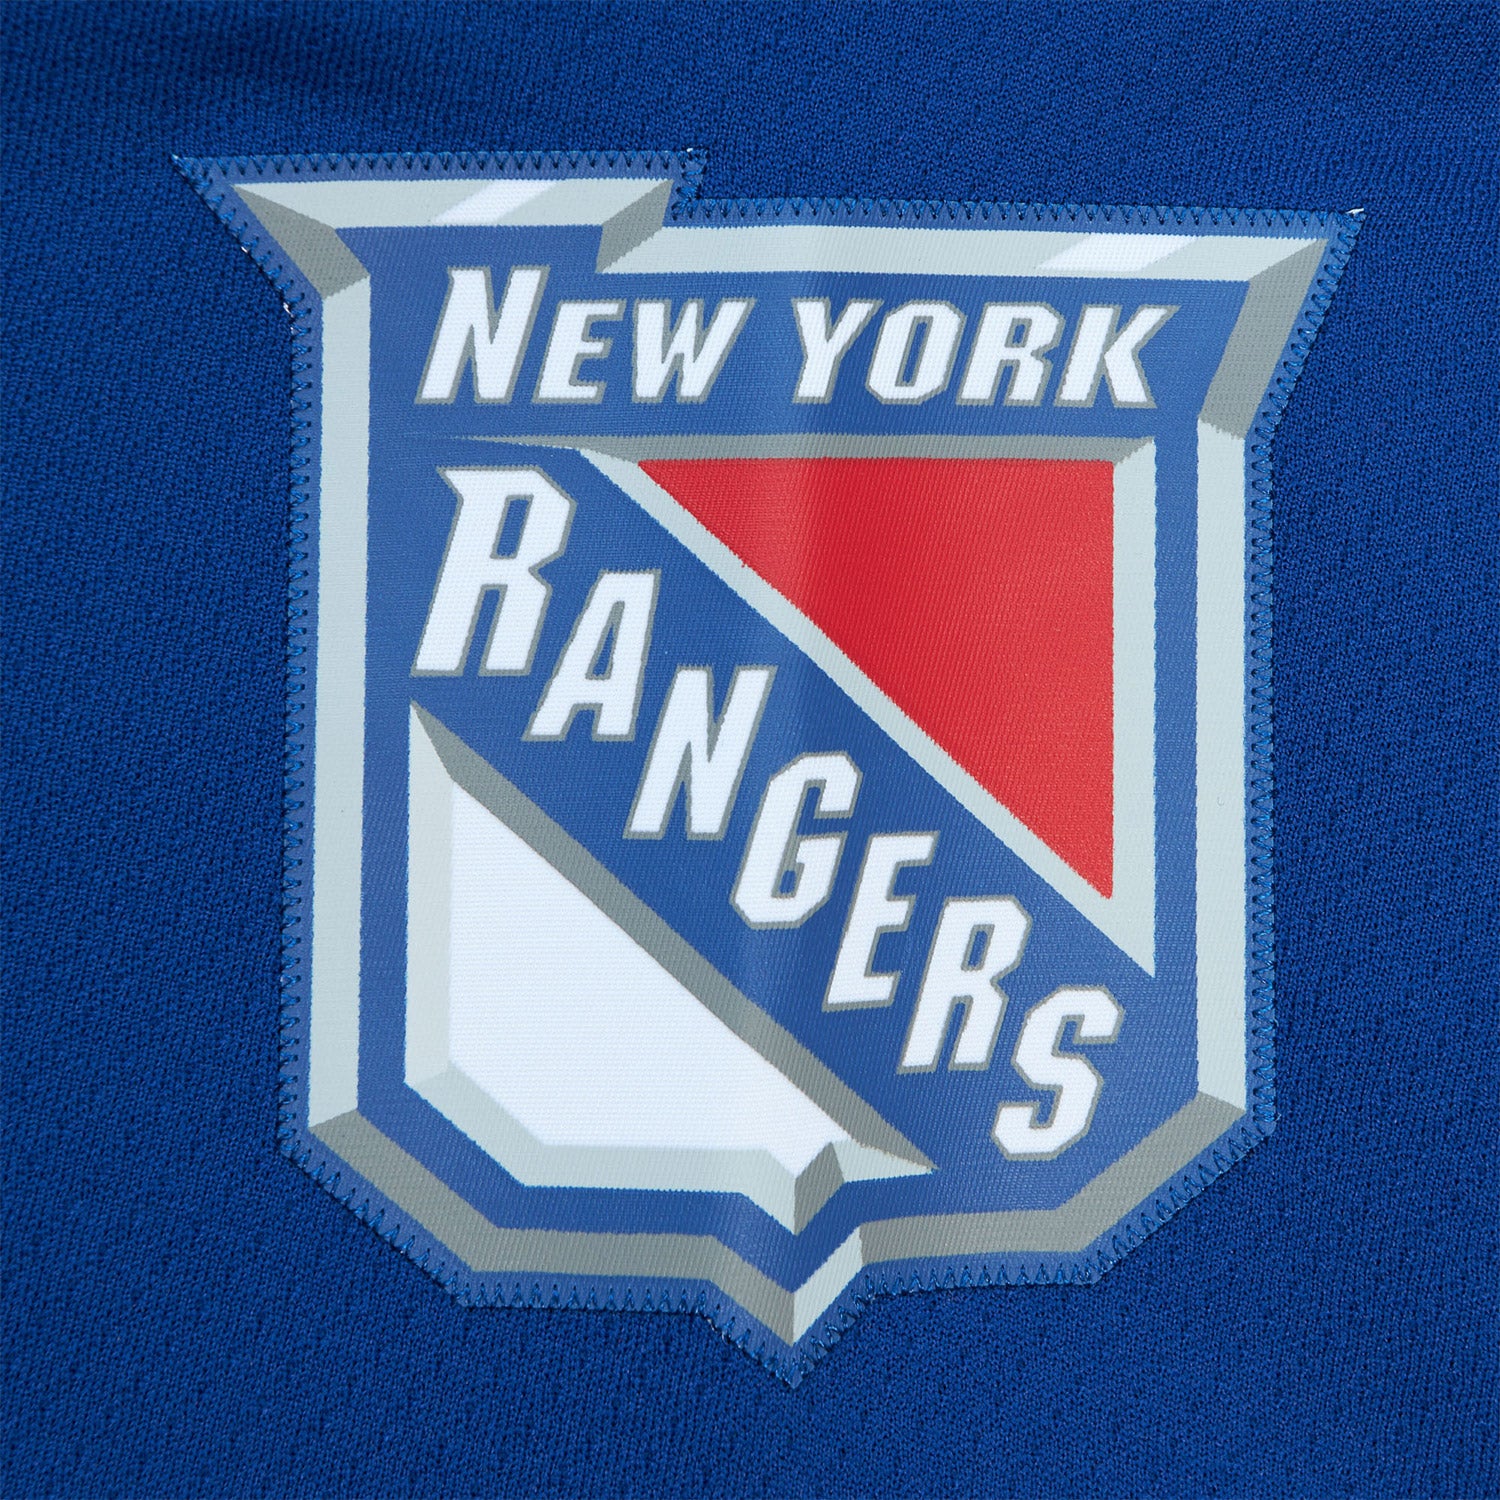 Mitchell & Ness Rangers Wayne Gretzky 1996 Alternate Jersey In Blue - Zoom View On Shoulder Graphic